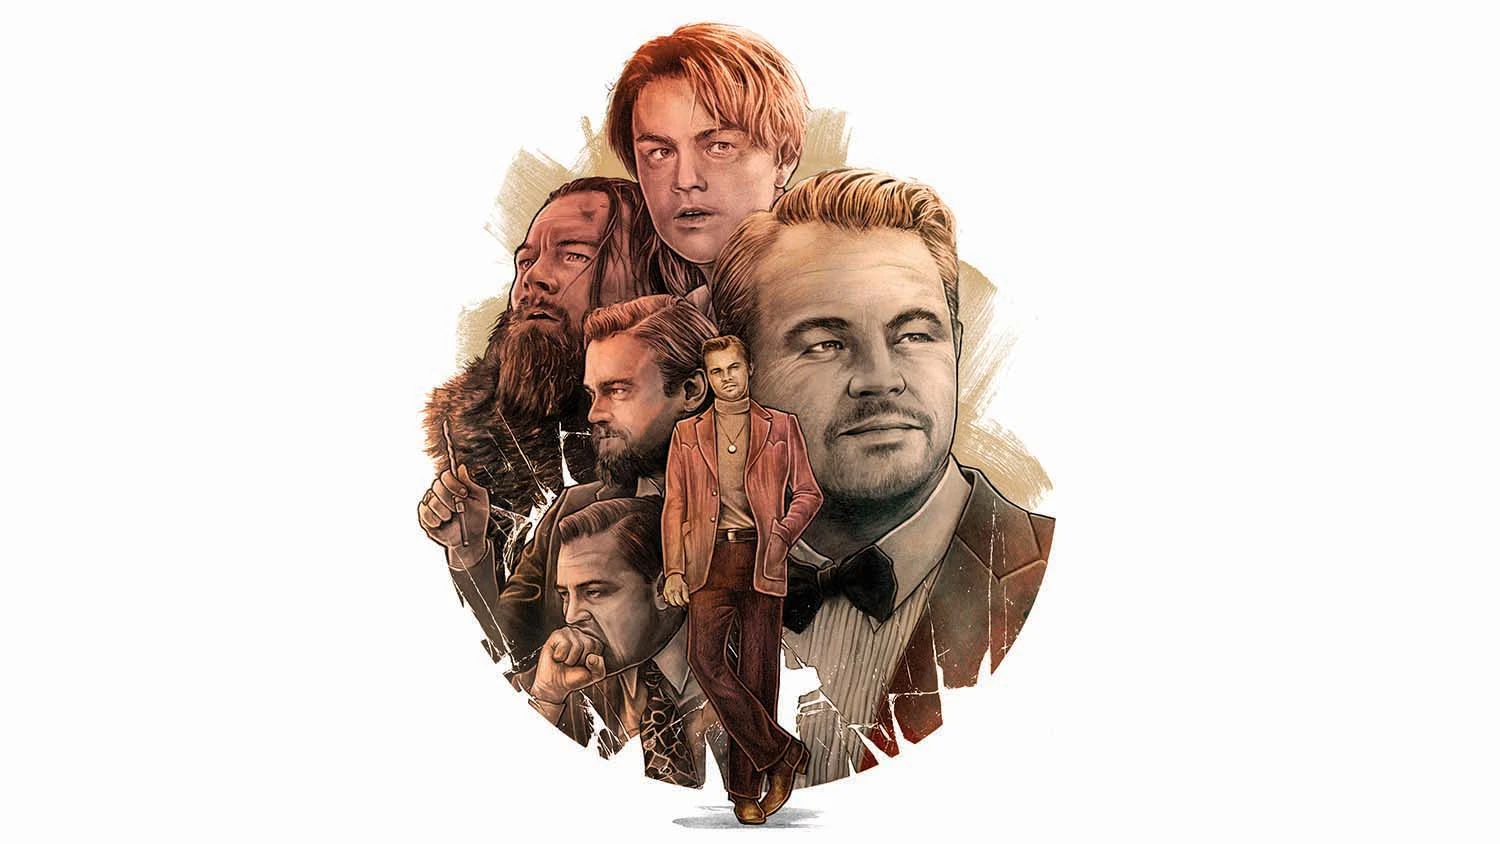 “His Brand Is Excellence”: How Leonardo DiCaprio Became Hollywood’s Last Movie Star